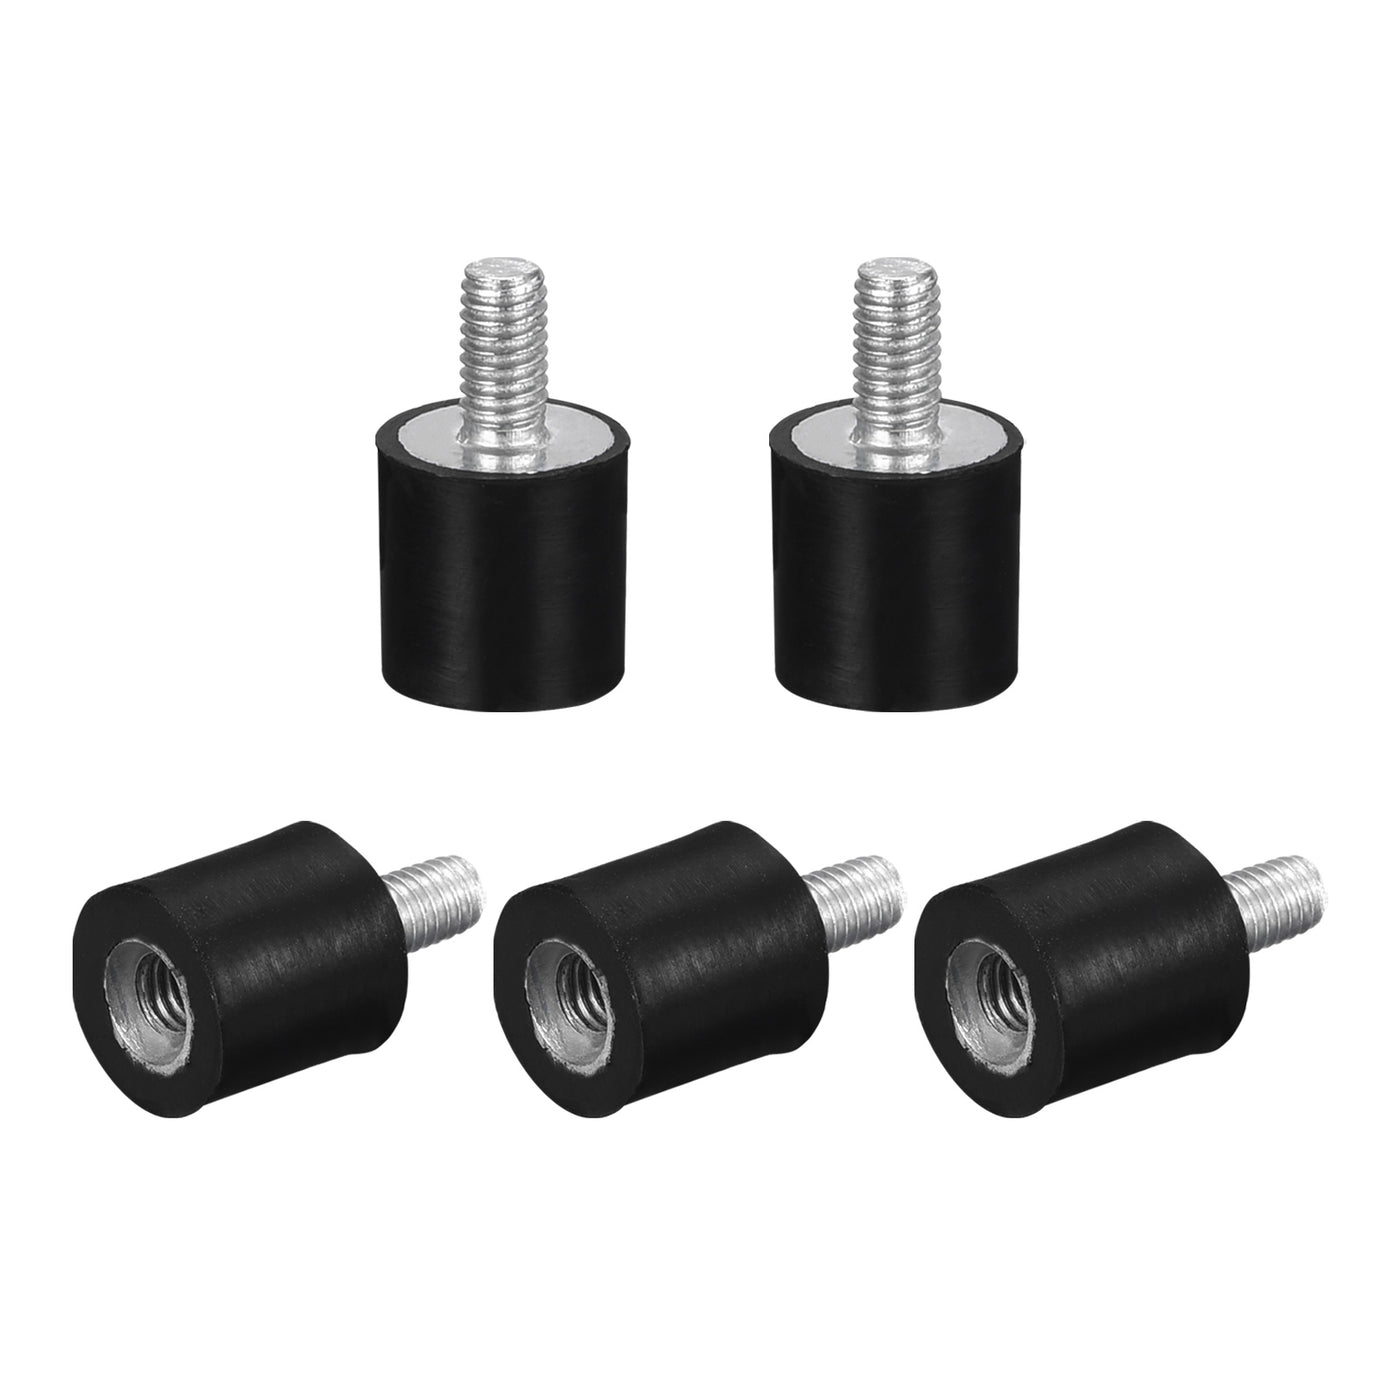 uxcell Uxcell Rubber Mount 5pcs M3 Male/Female Vibration Isolator Shock Absorber, D8mmxH8mm